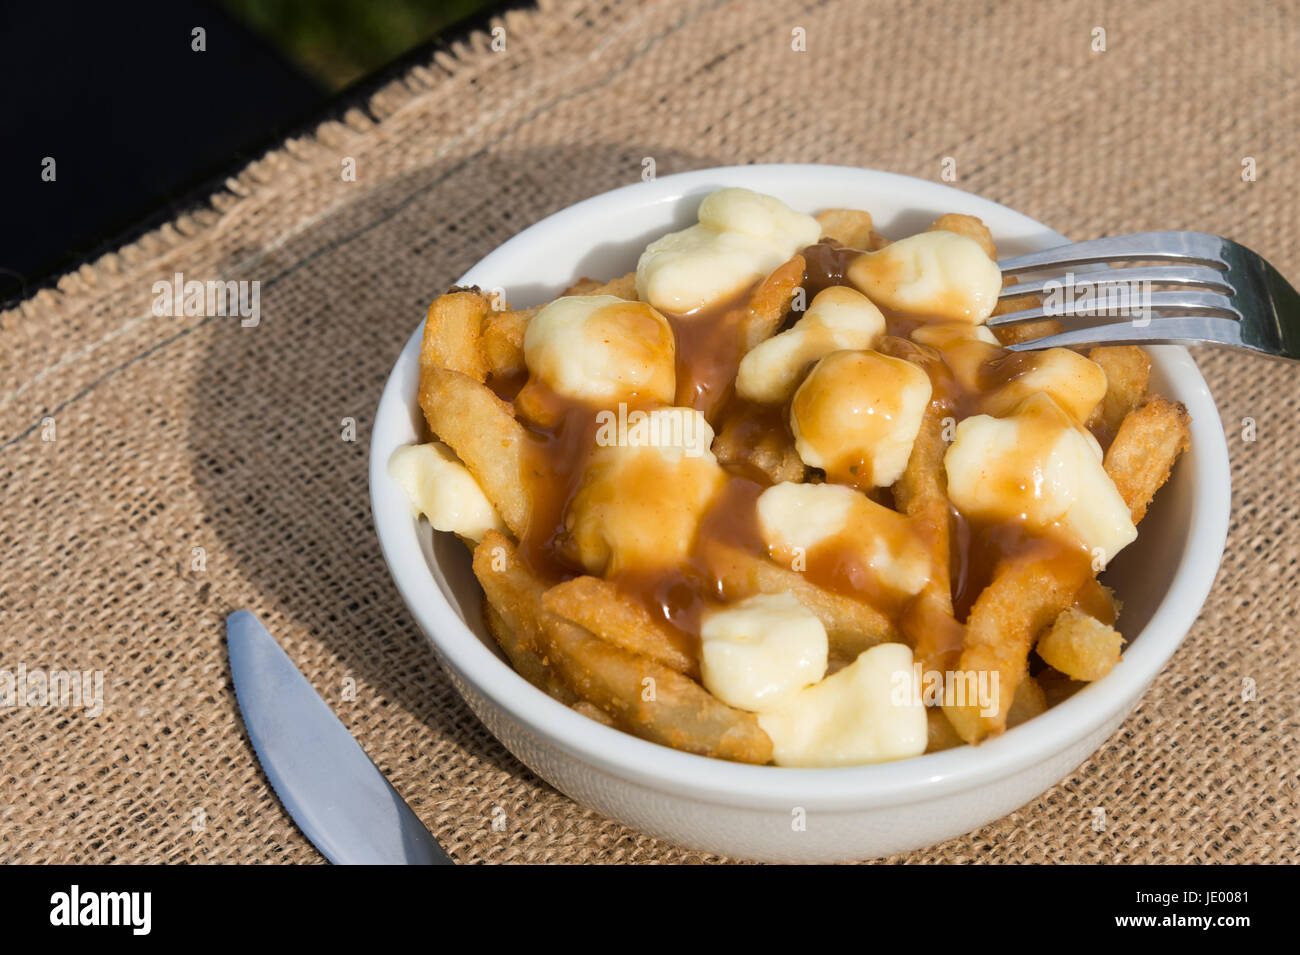 Classic Quebec poutine with french fries, gravy, and cheese curds Stock Photo